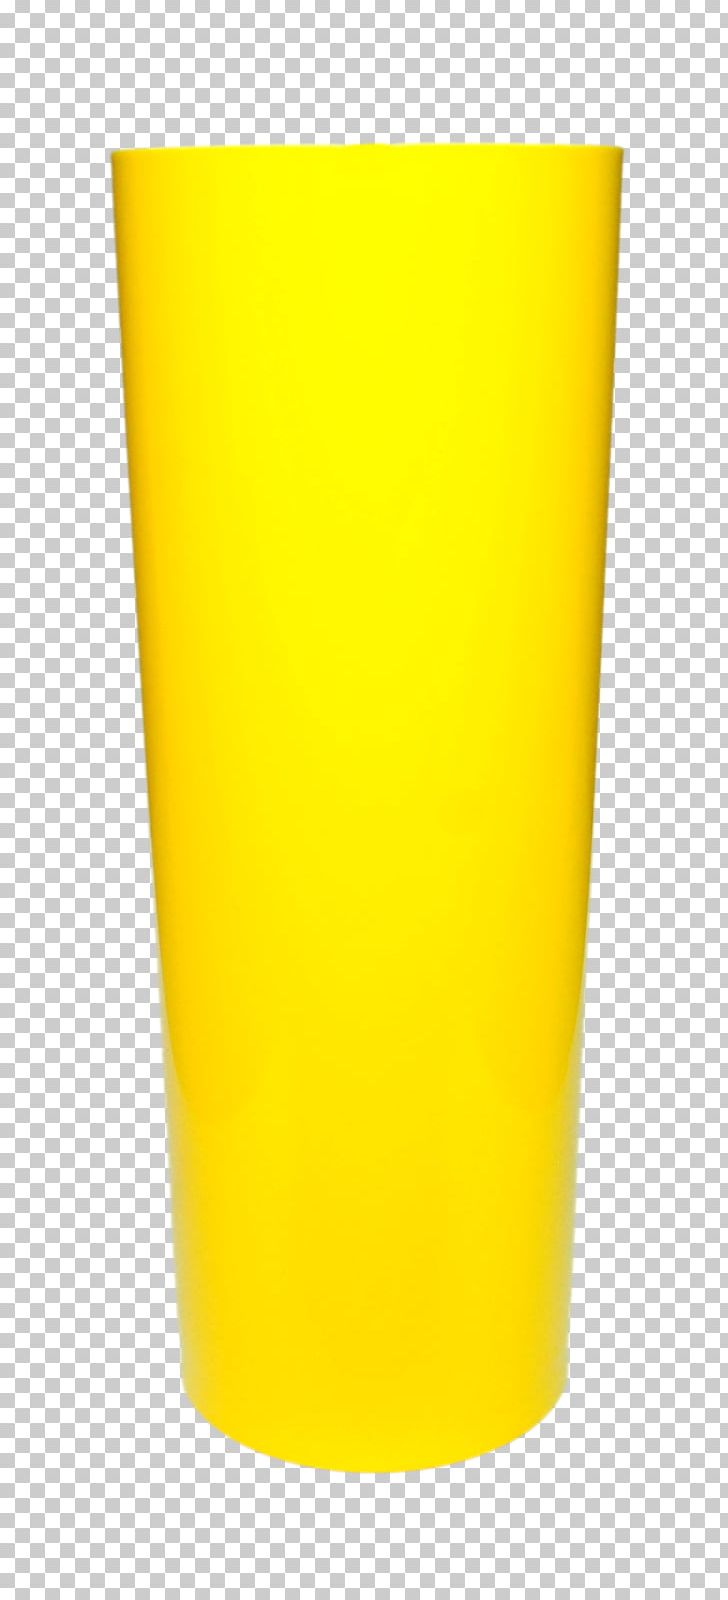 Cup Pint Glass PNG, Clipart, Cup, Cylinder, Drinkware, Food Drinks, Glass Free PNG Download